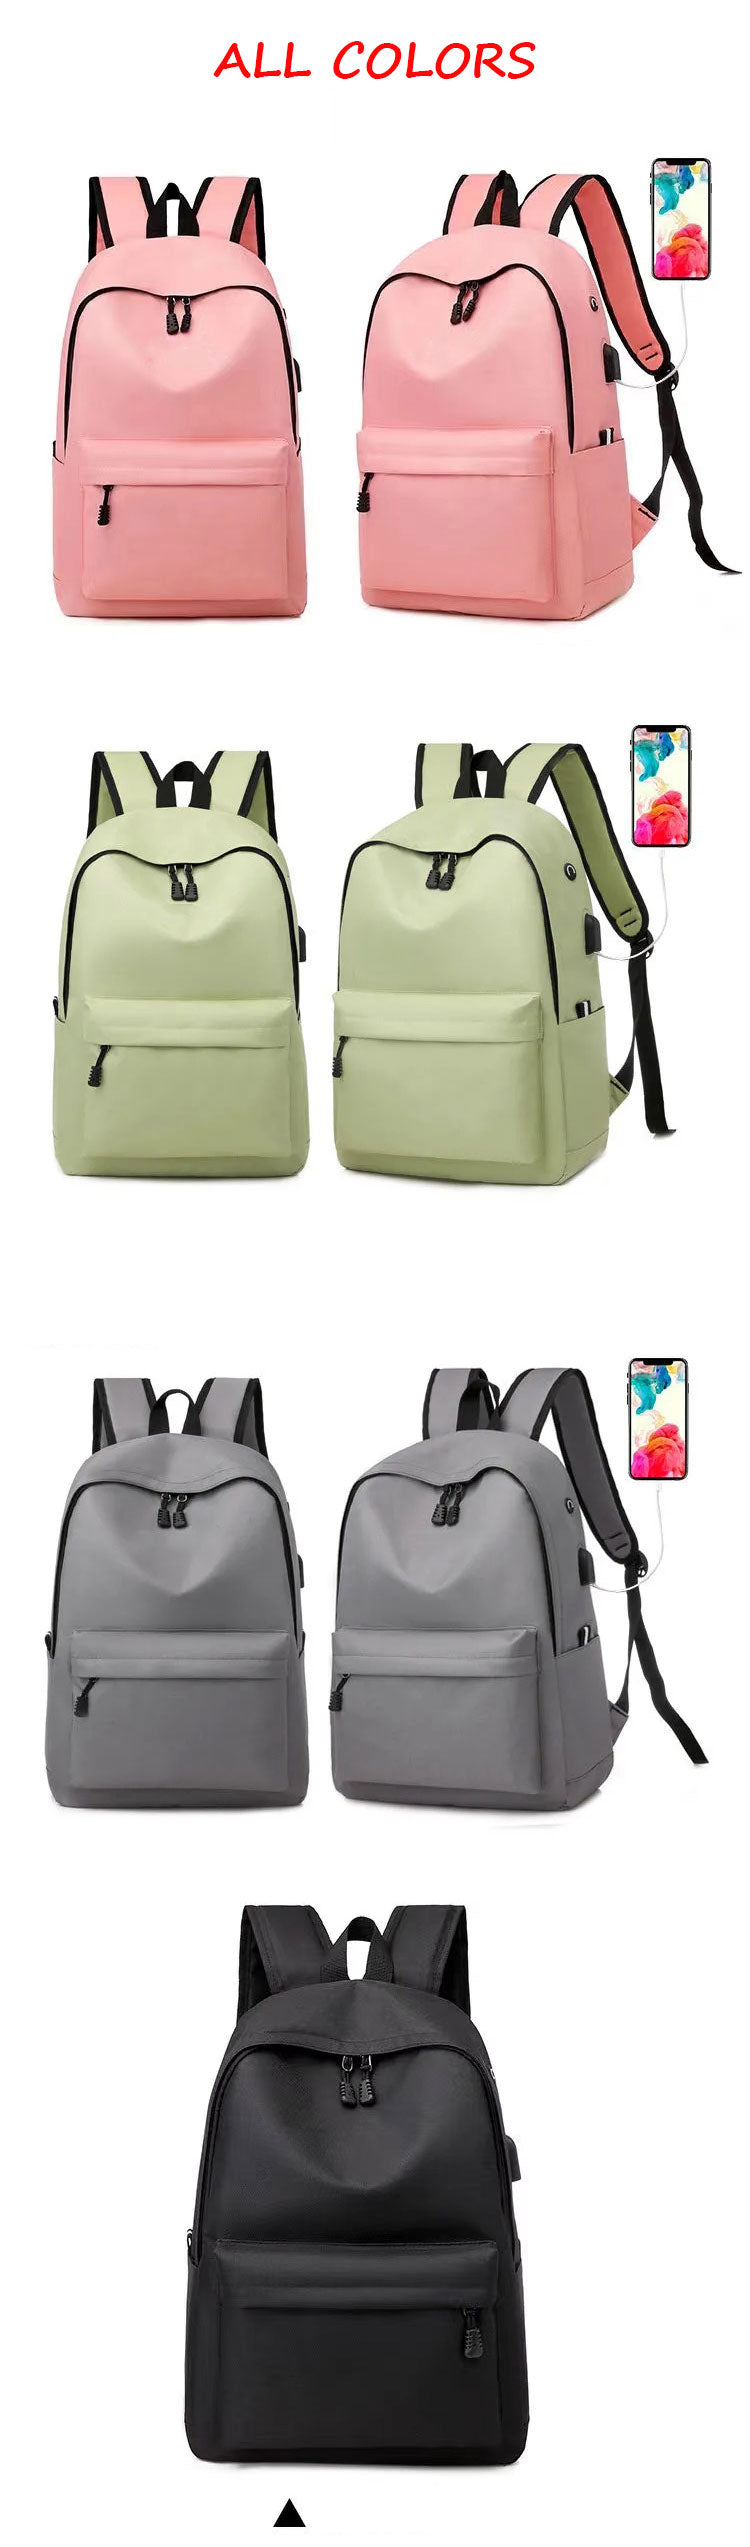 Waterproof Laptop Backpack With Usb Charging Port